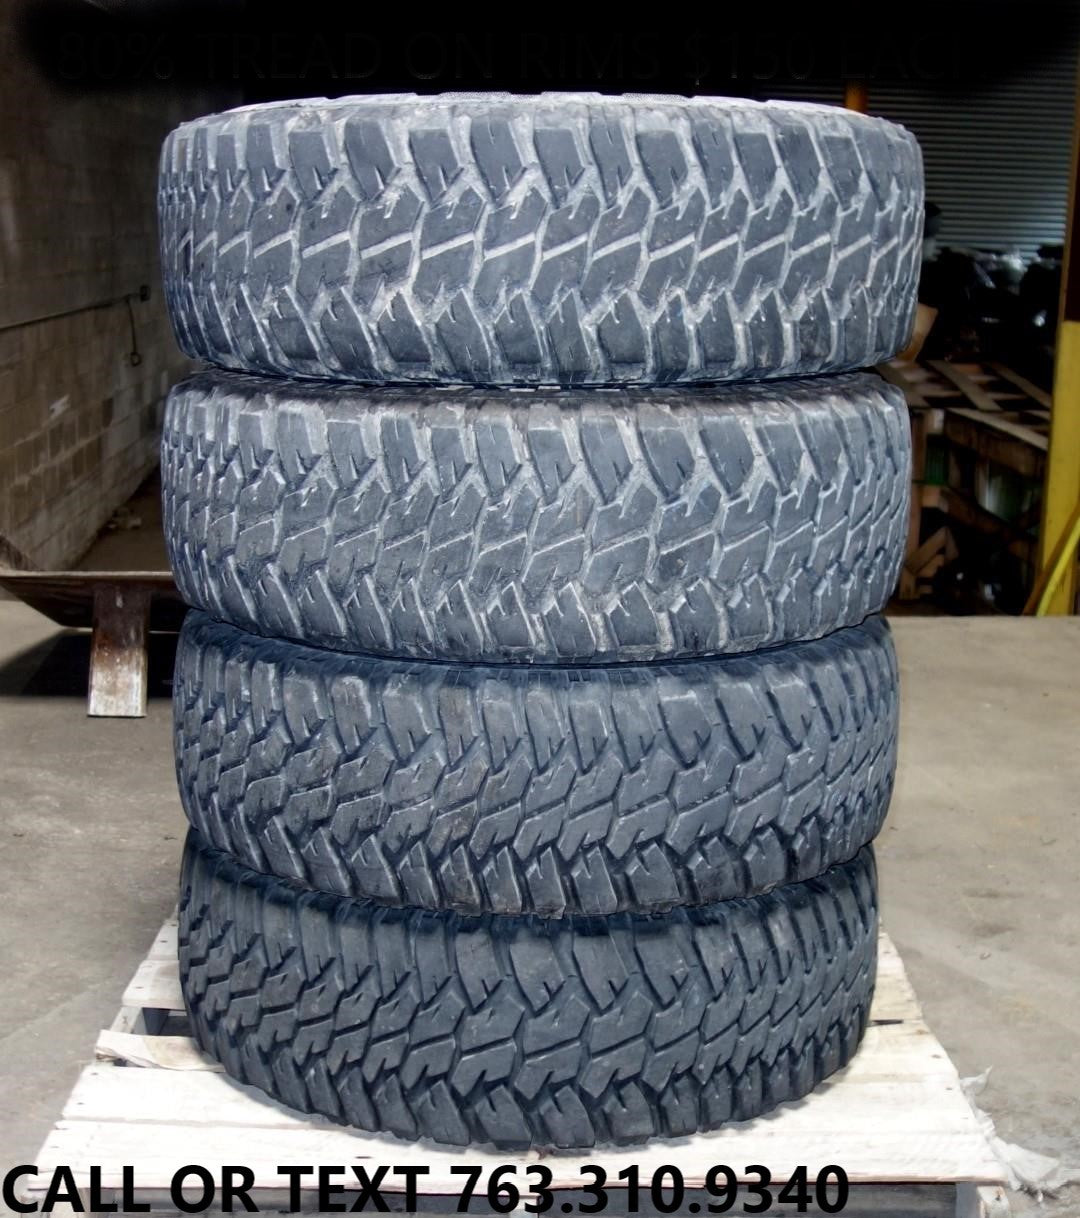 Goodyear MTR Kevlar Humvee Tires Matched Sets of four or five 37” Moun –  Federal Military Parts (763) 310-9340